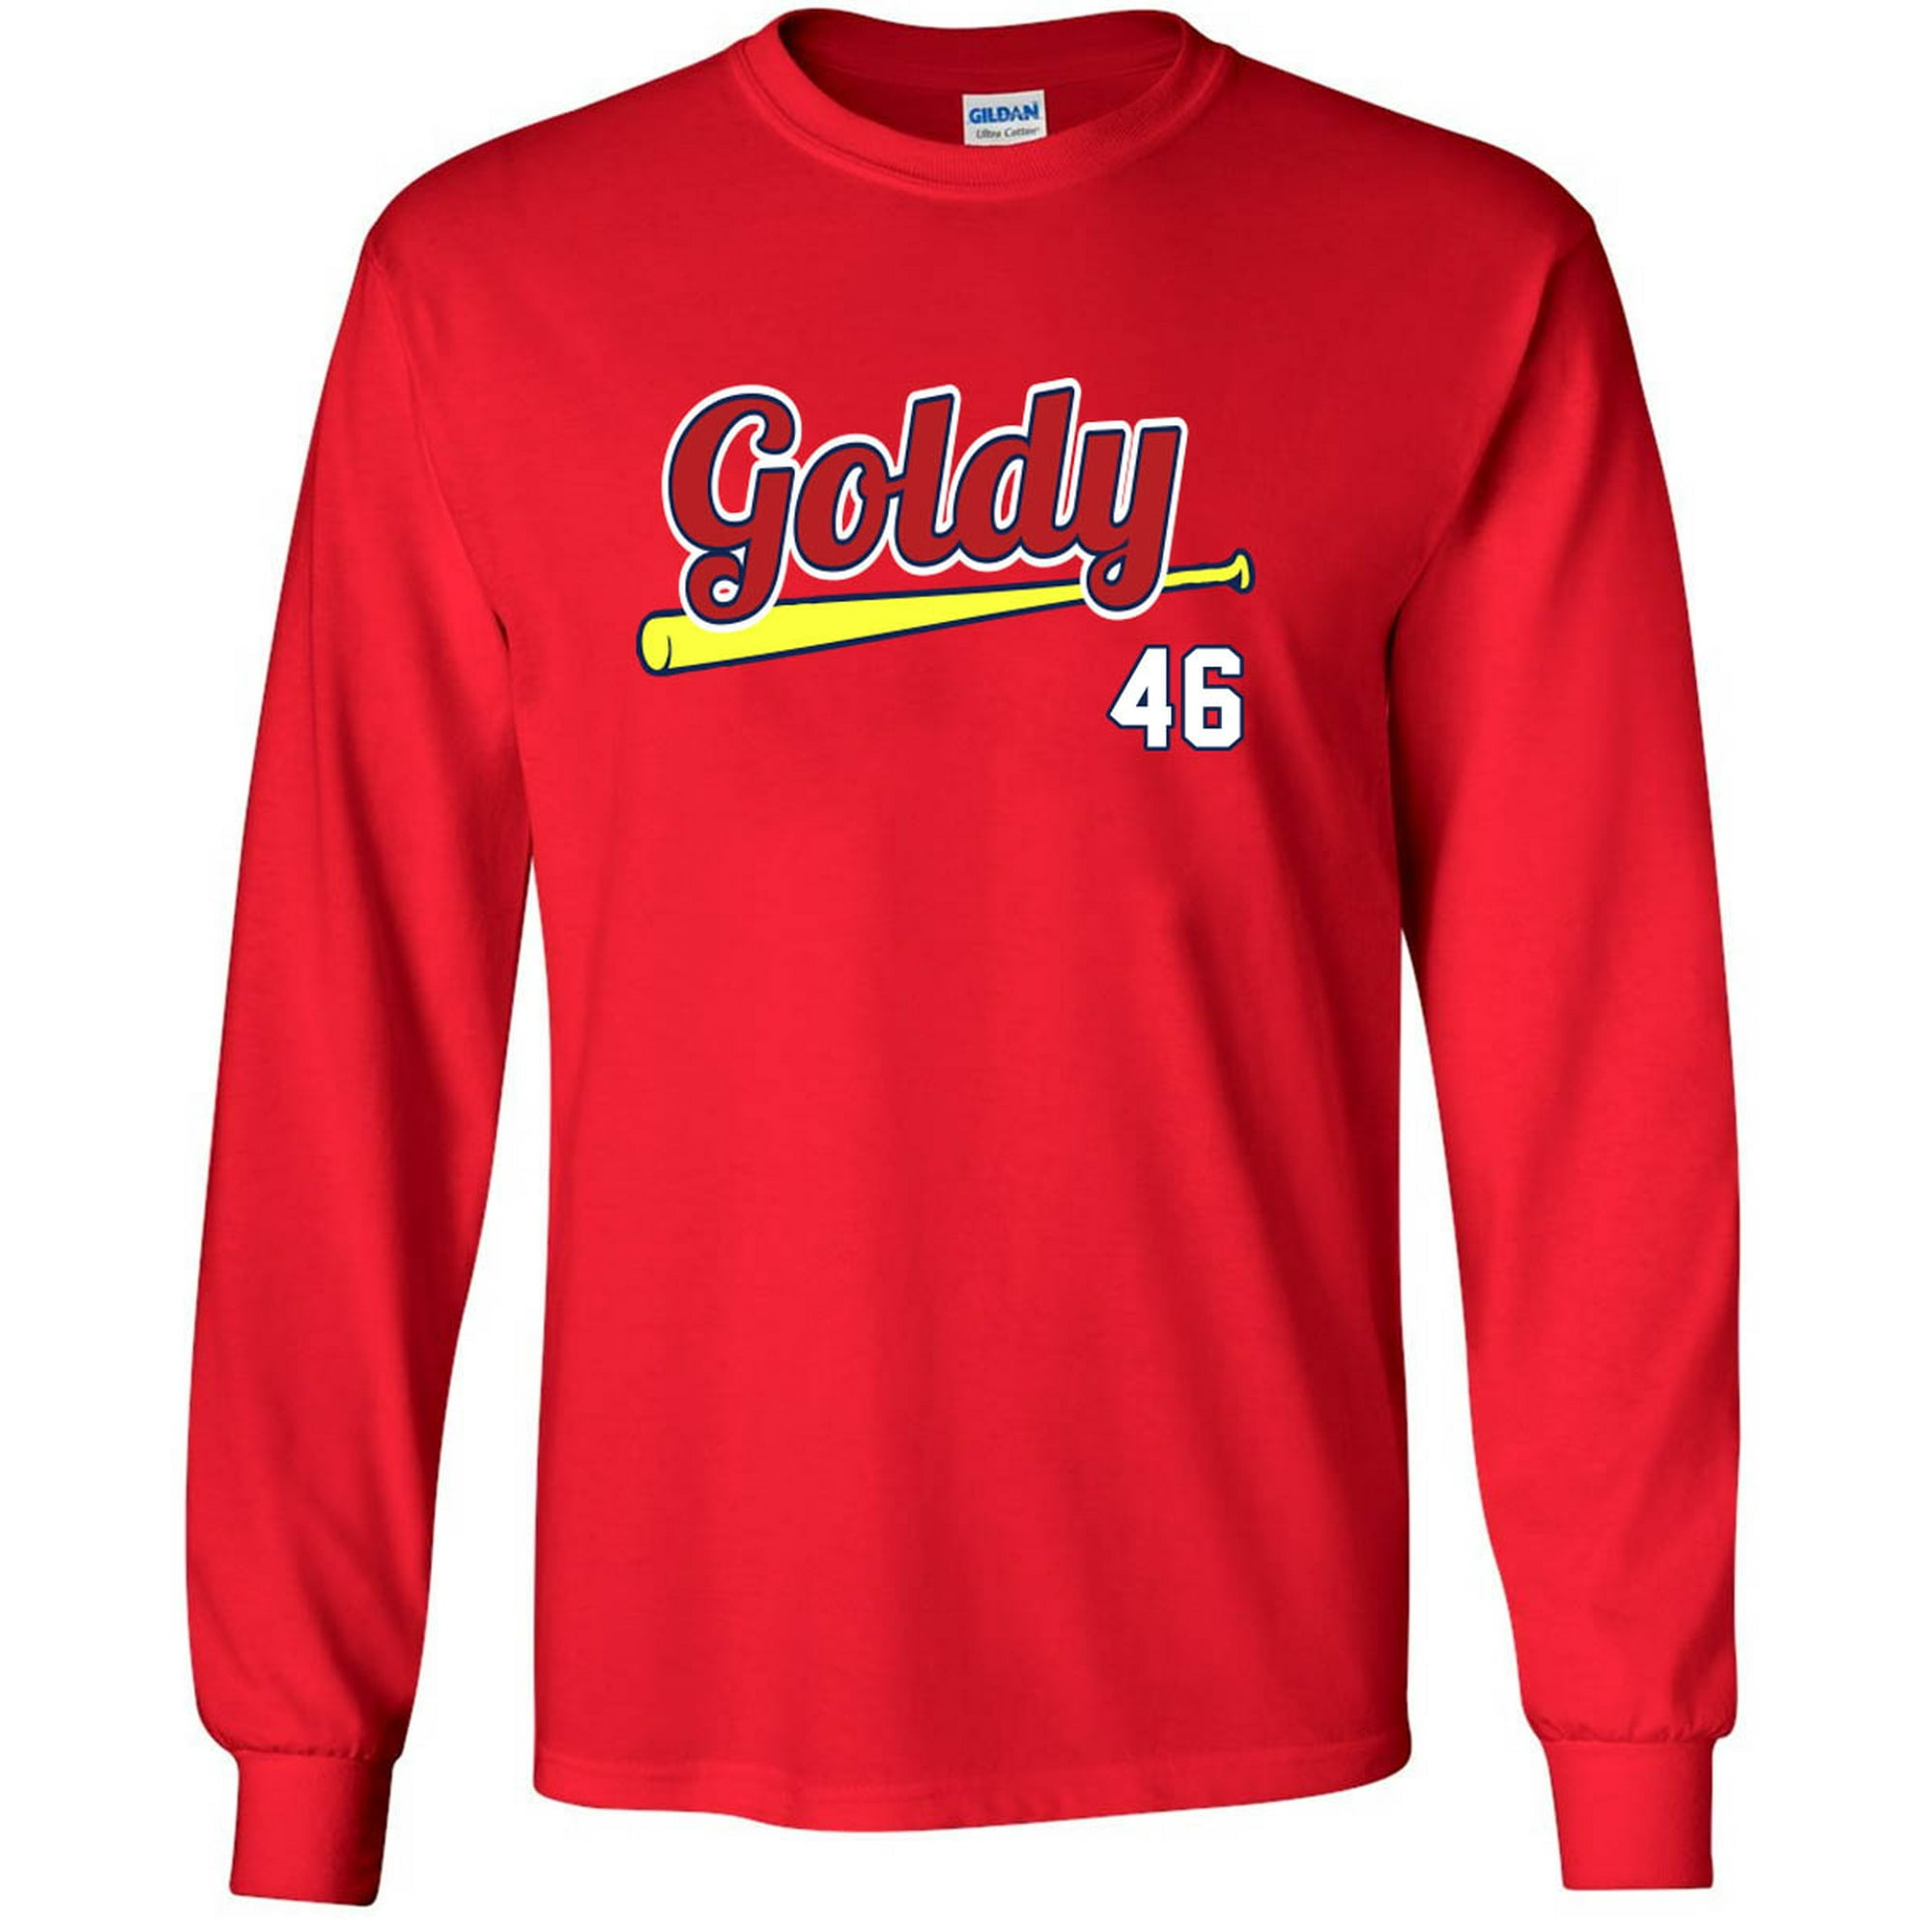 LONG SLEEVE RED St Louis Goldschmidt Goldy T-shirt YOUTH 